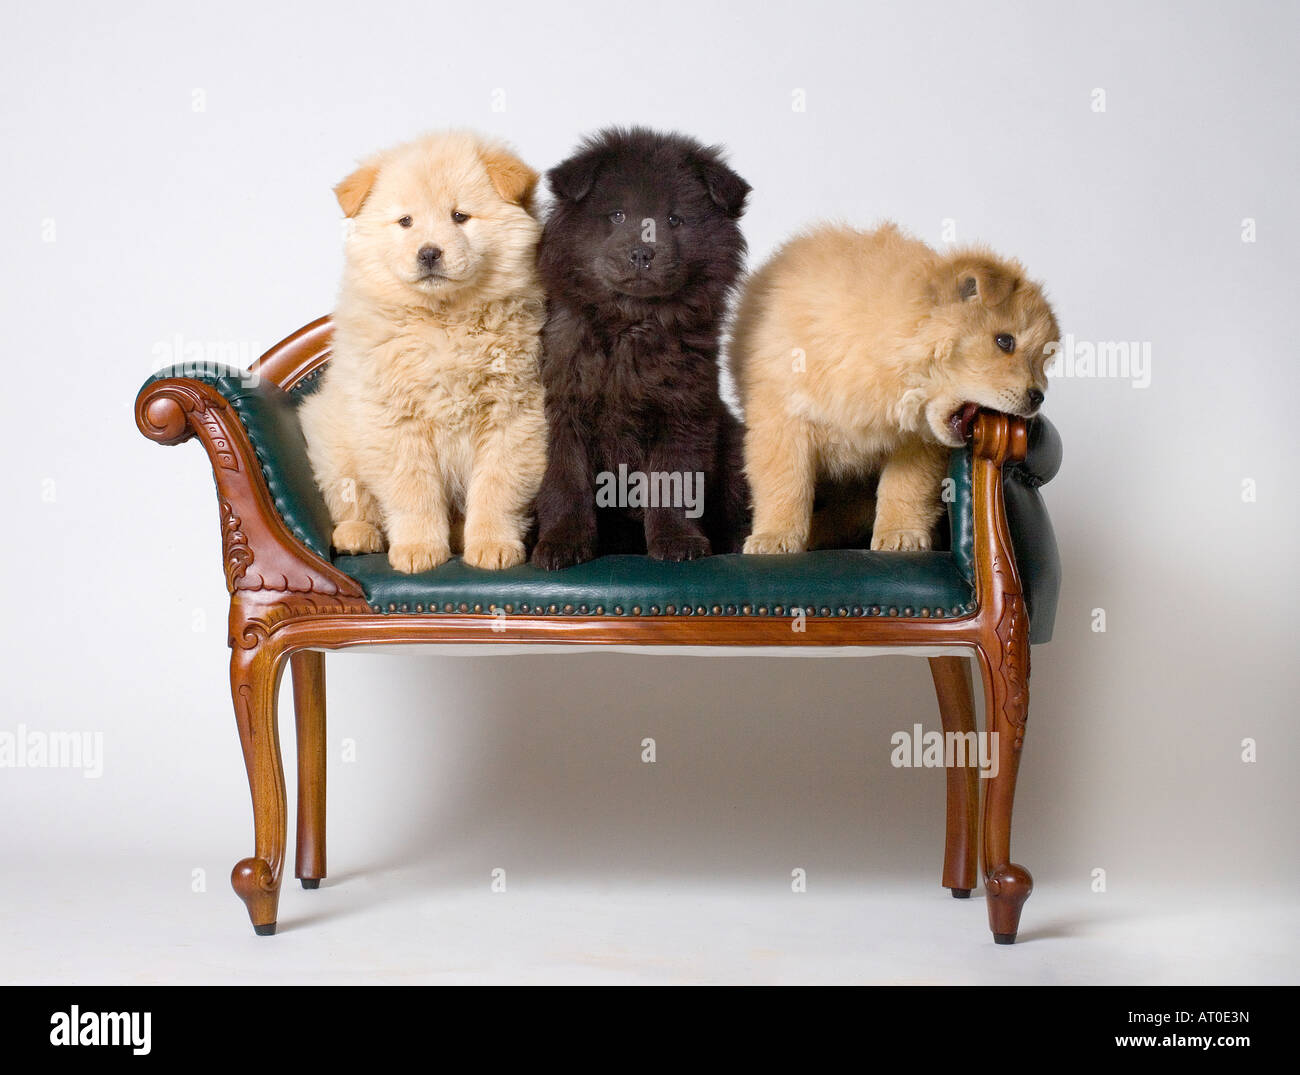 Chow puppies Stock Photo